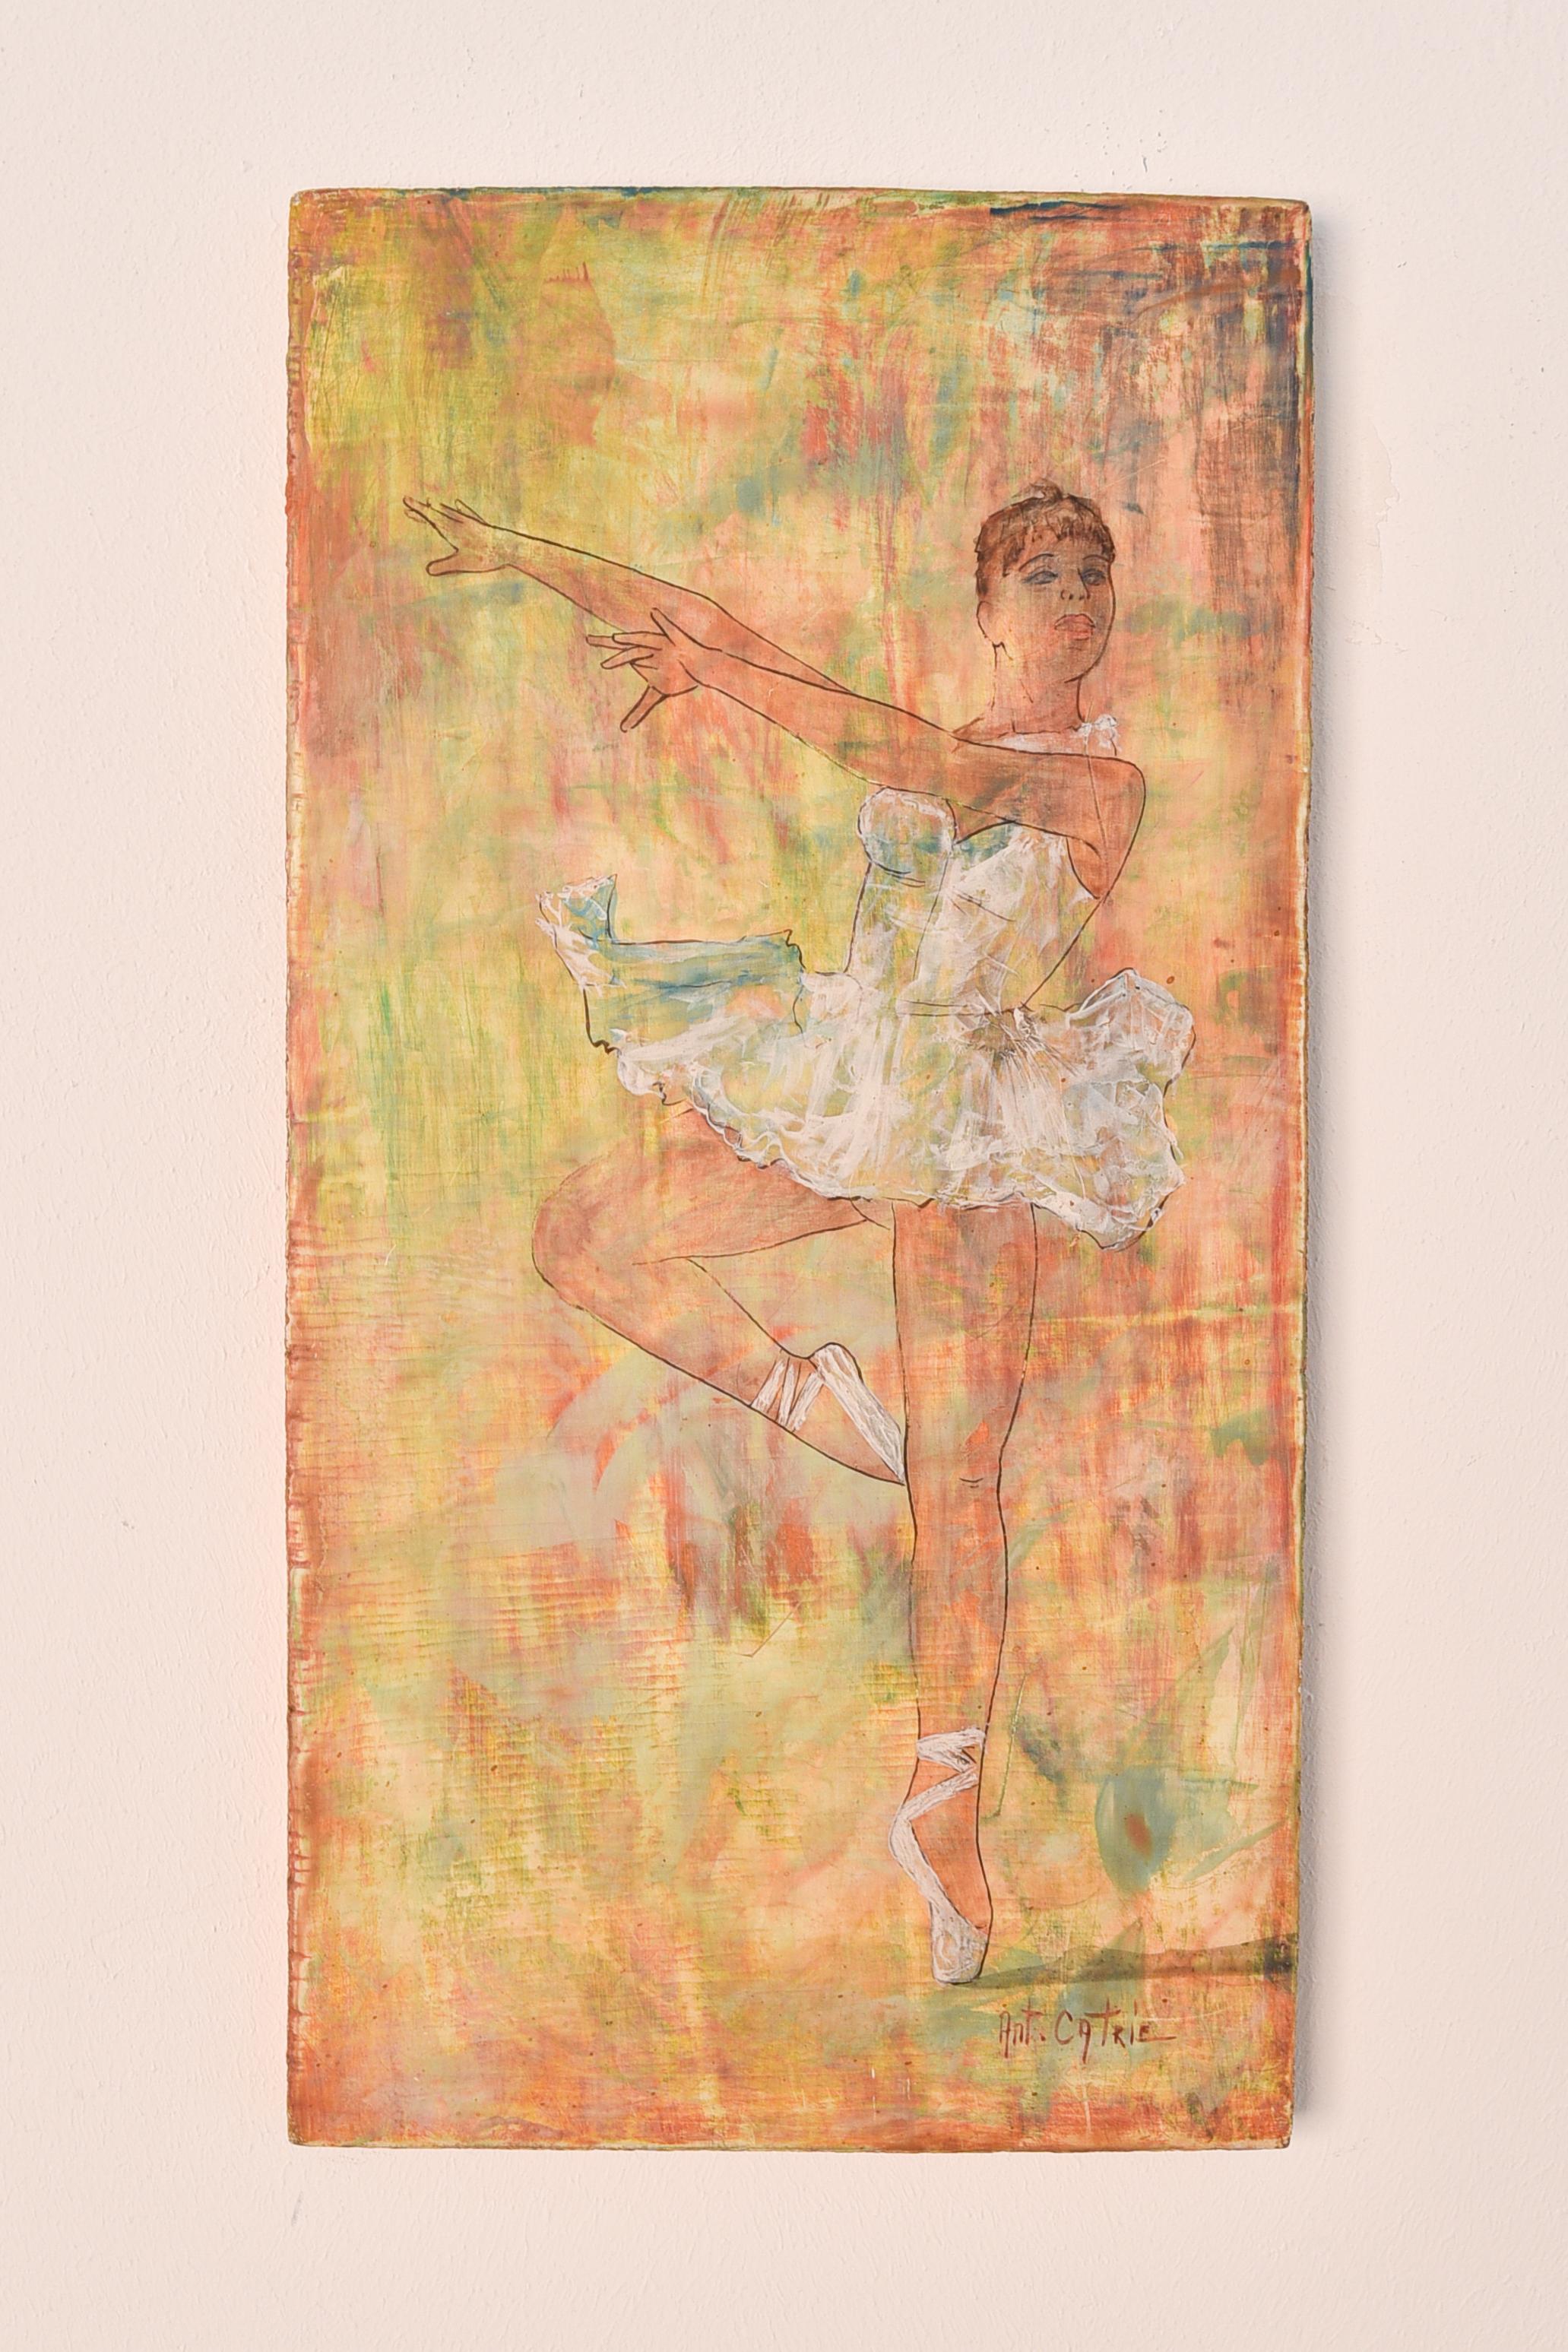 Ballerina dancer on vivid yellow and orange background  - Painting by Antoon Catrie